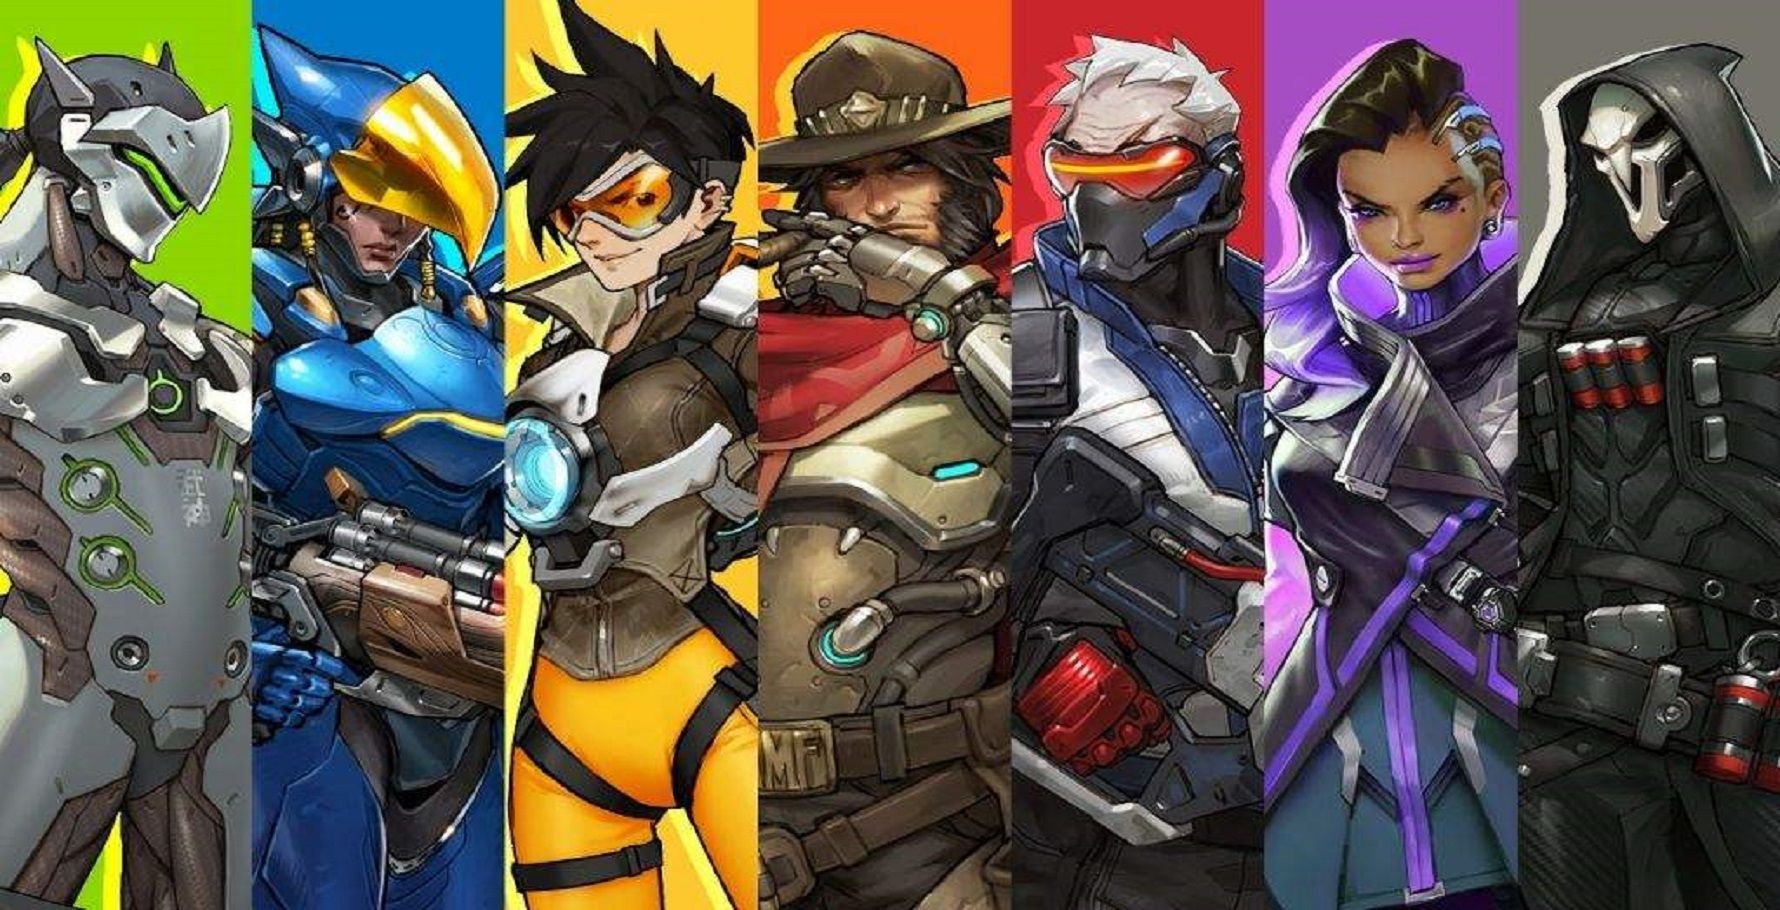 From left to right: Genji, Pharah, Tracer, McCree, Soldier 76, Sombra, Reaper